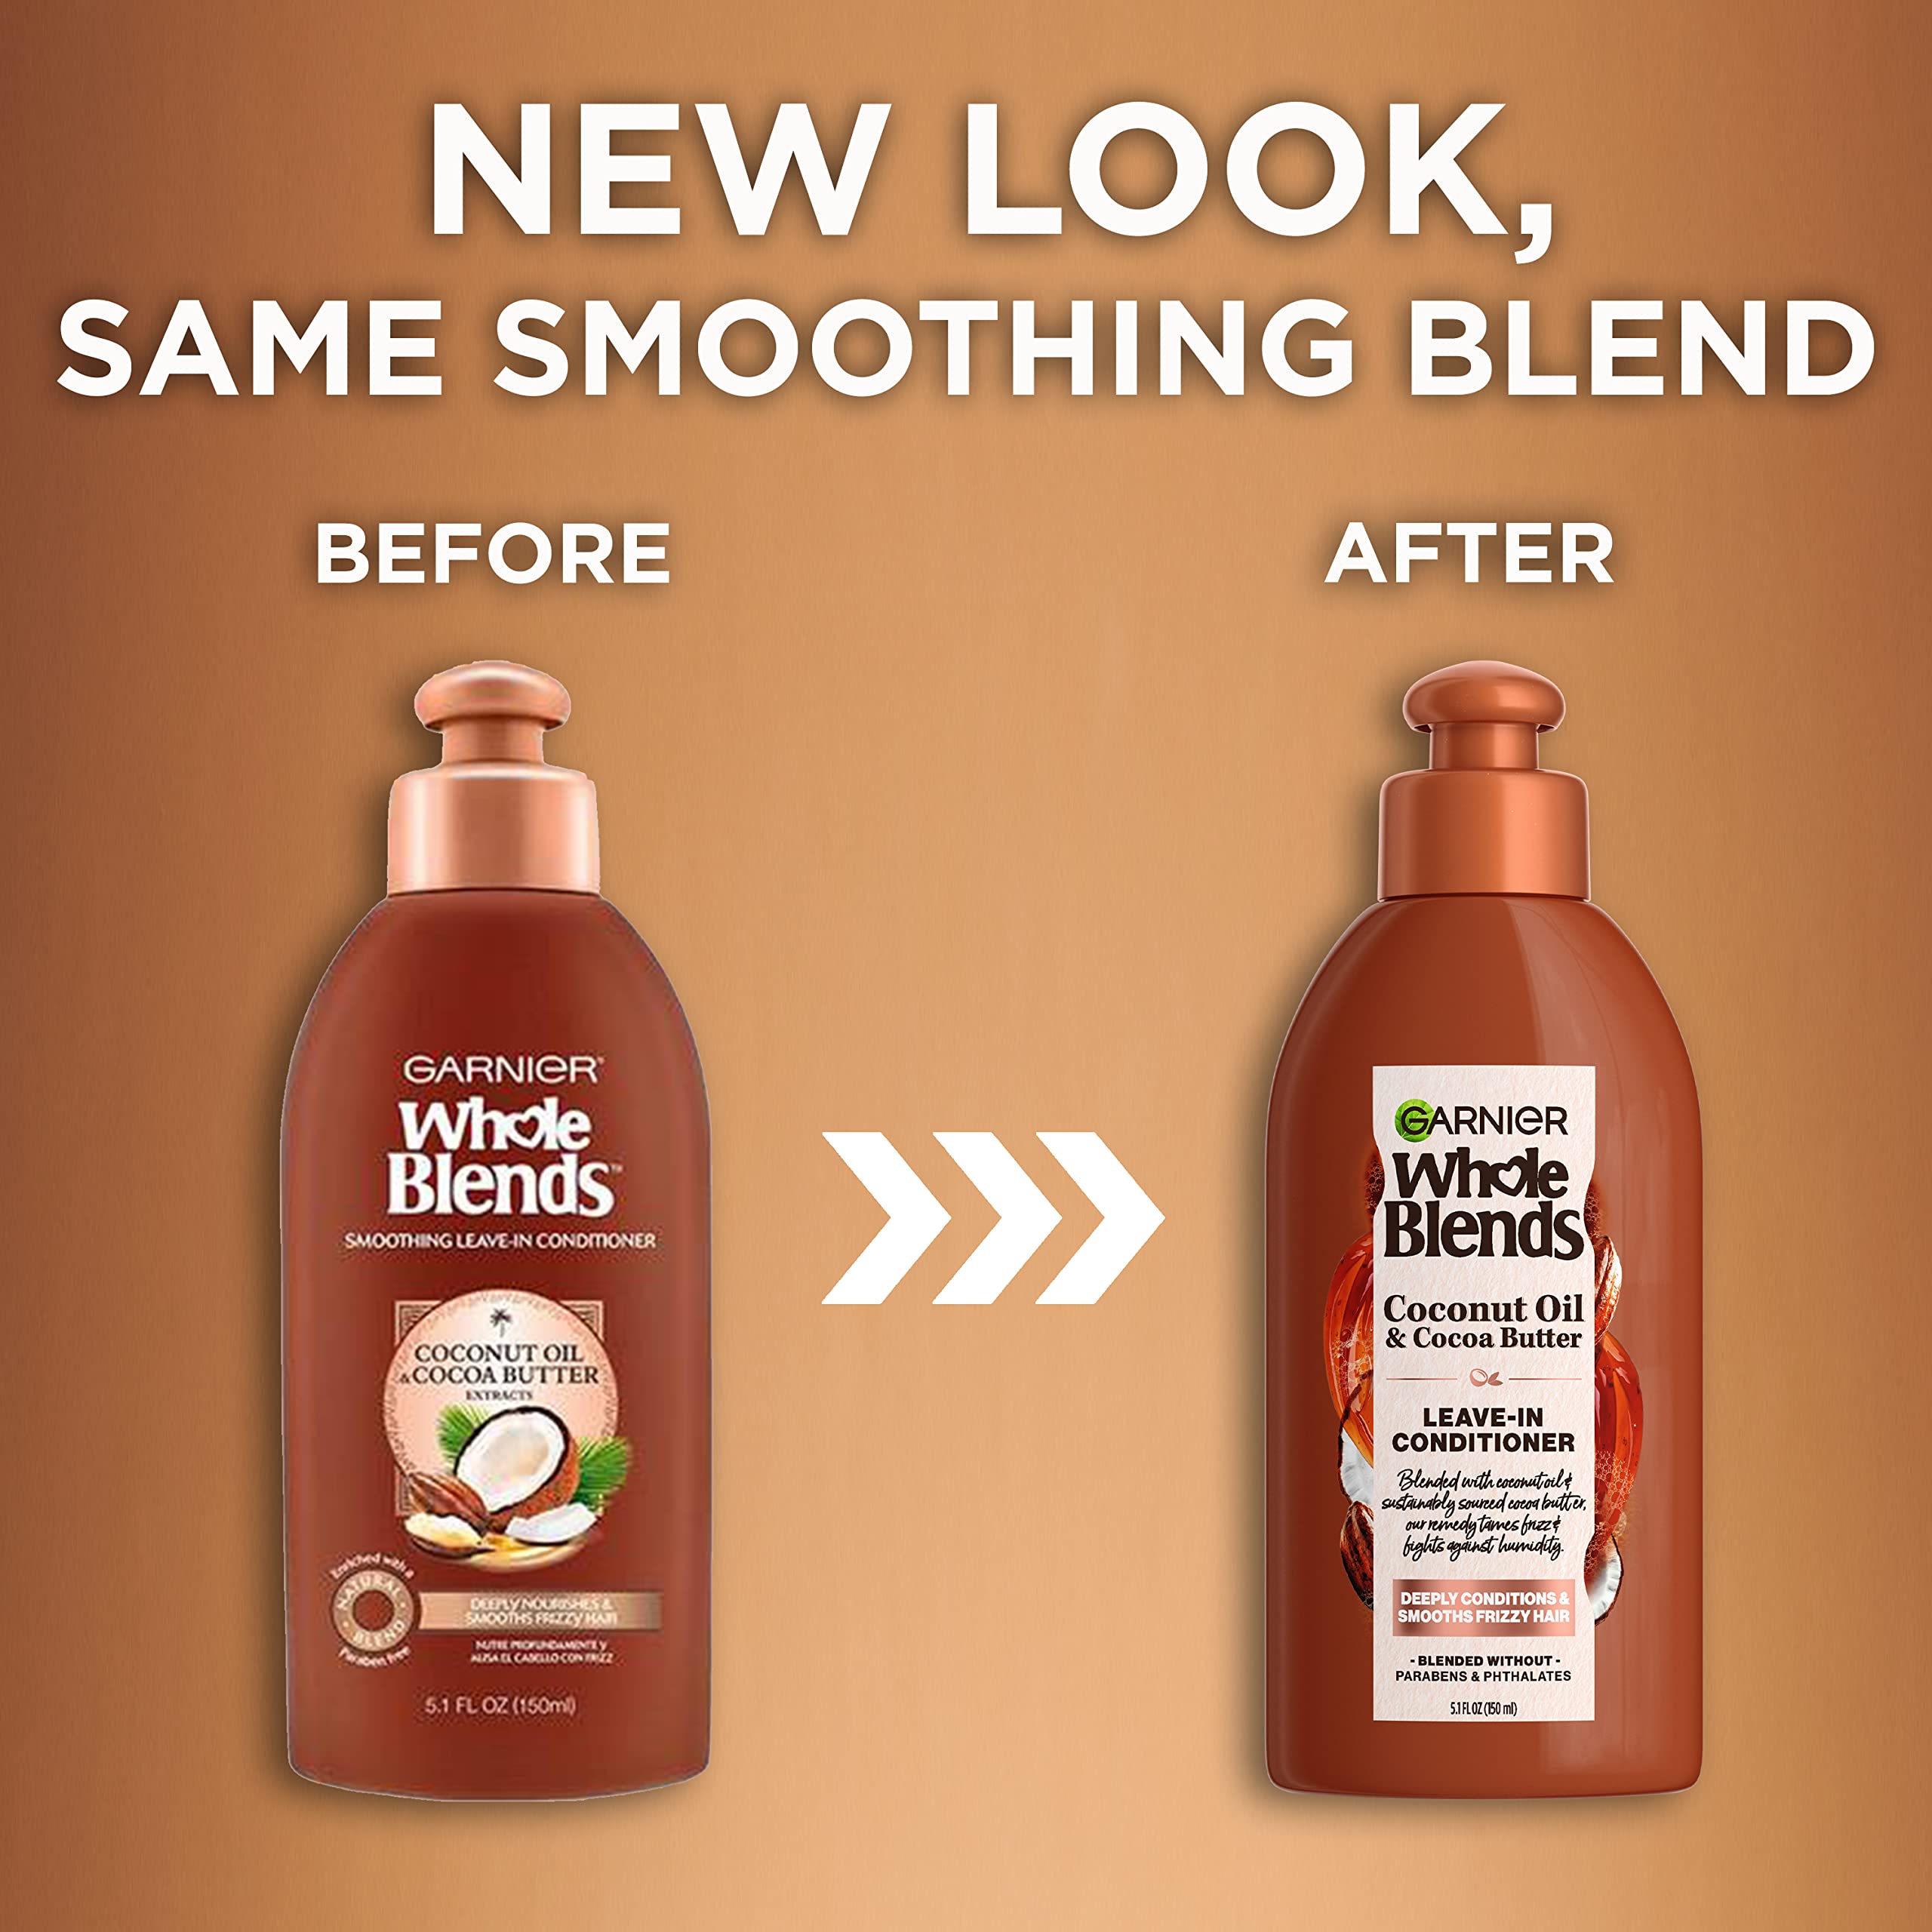 Garnier Whole Blends Coconut Oil & Cocoa Butter Smoothing Leave in Conditioner for Frizzy Hair, 5.1 Fl Oz, 1 Count (Packaging May Vary)